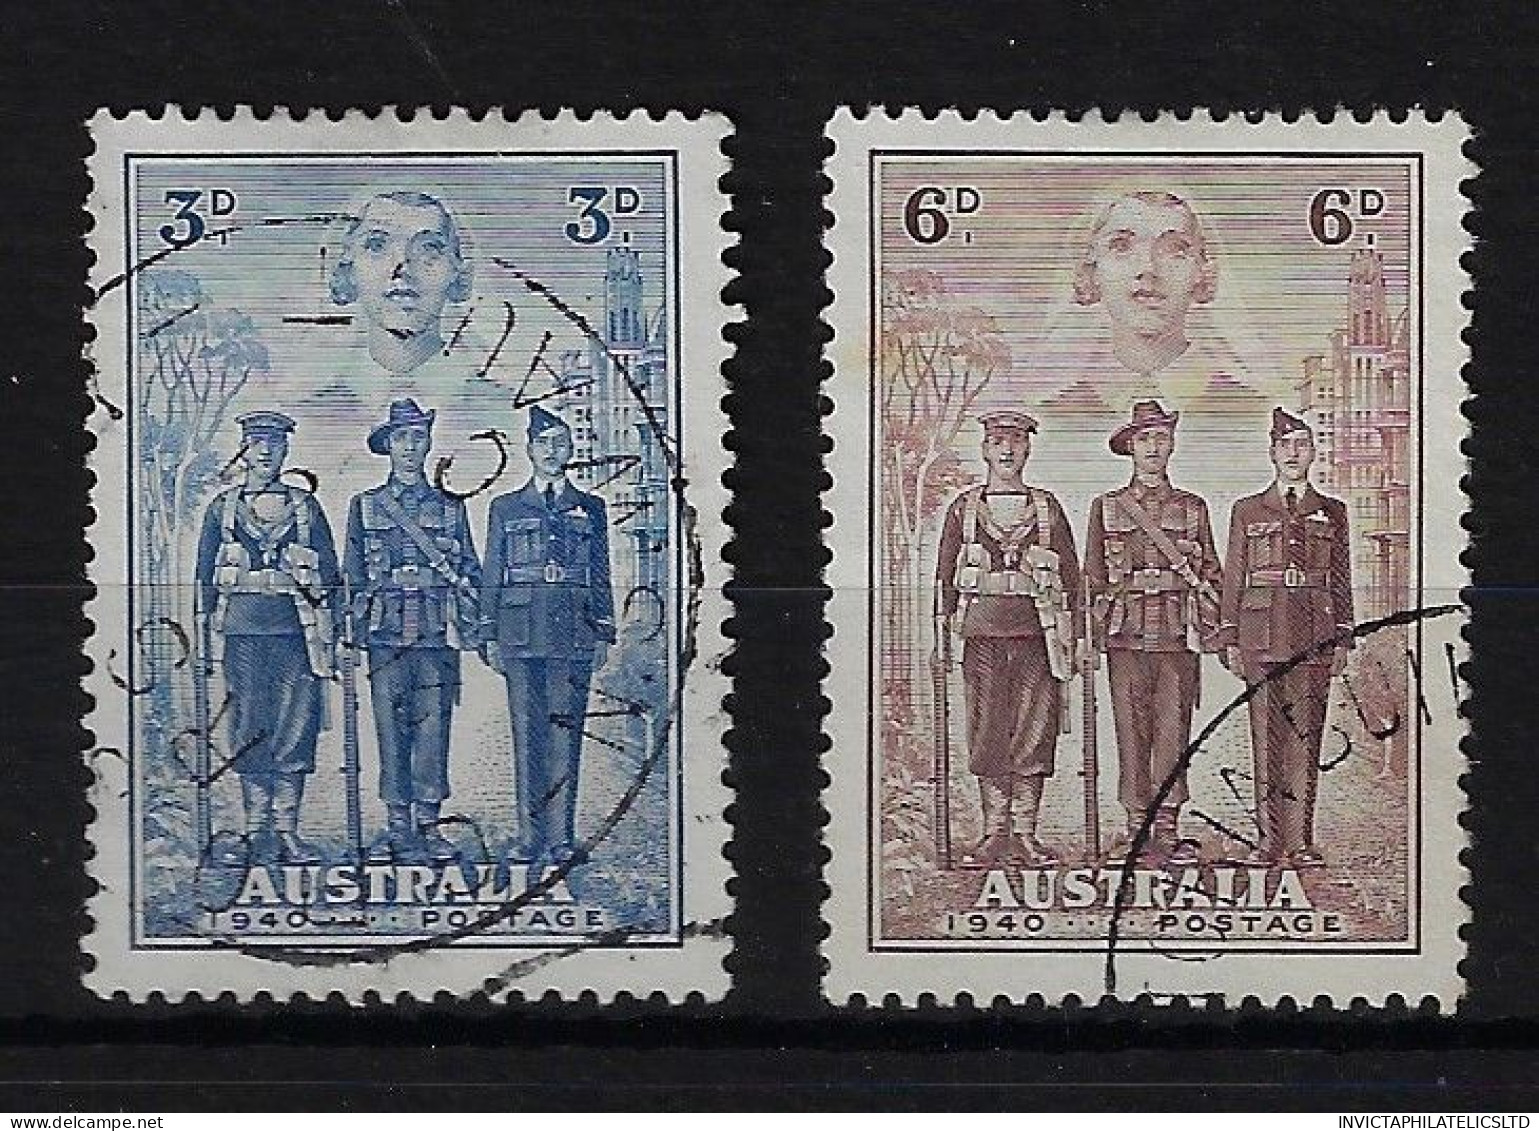 AUSTRALIA SG198/9, 3D +6D ARMED FORCES, FINE USED - Used Stamps